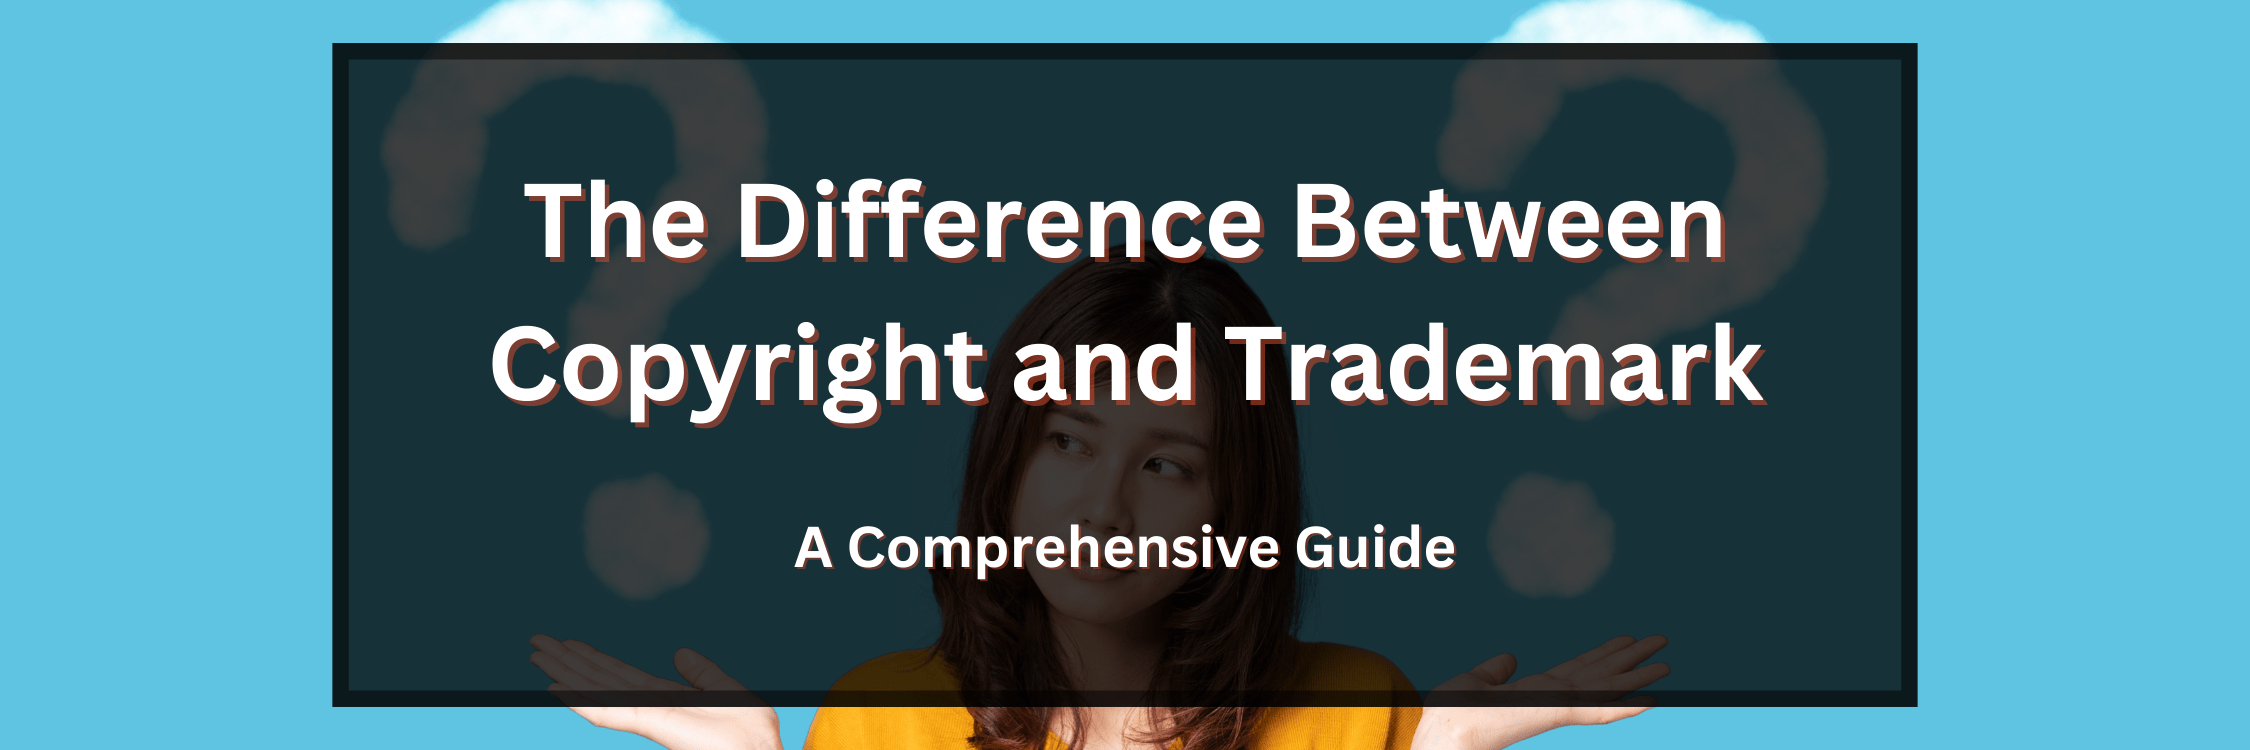 The Difference Between Copyright and Trademark: A Comprehensive Guide